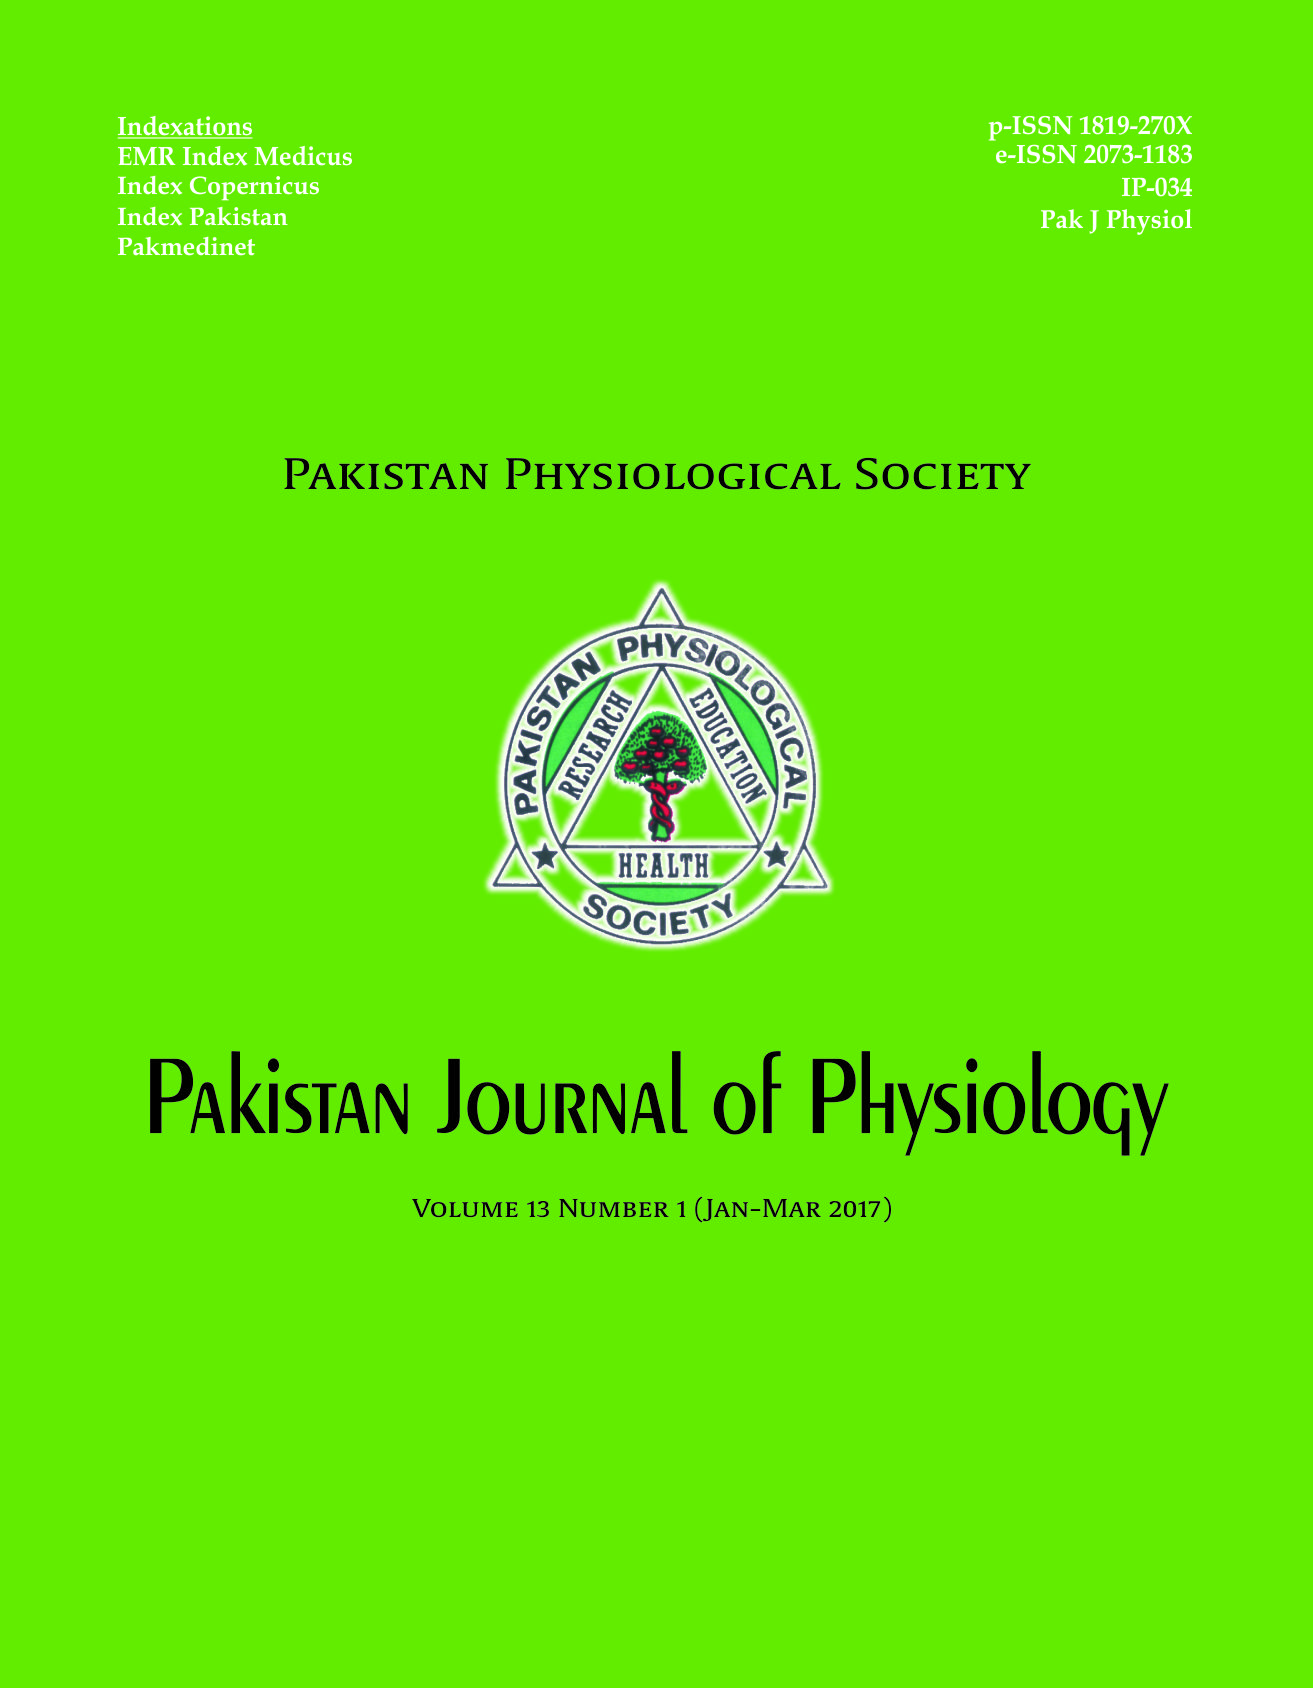 					View Vol. 13 No. 1 (2017): Pakistan Journal of Physiology
				